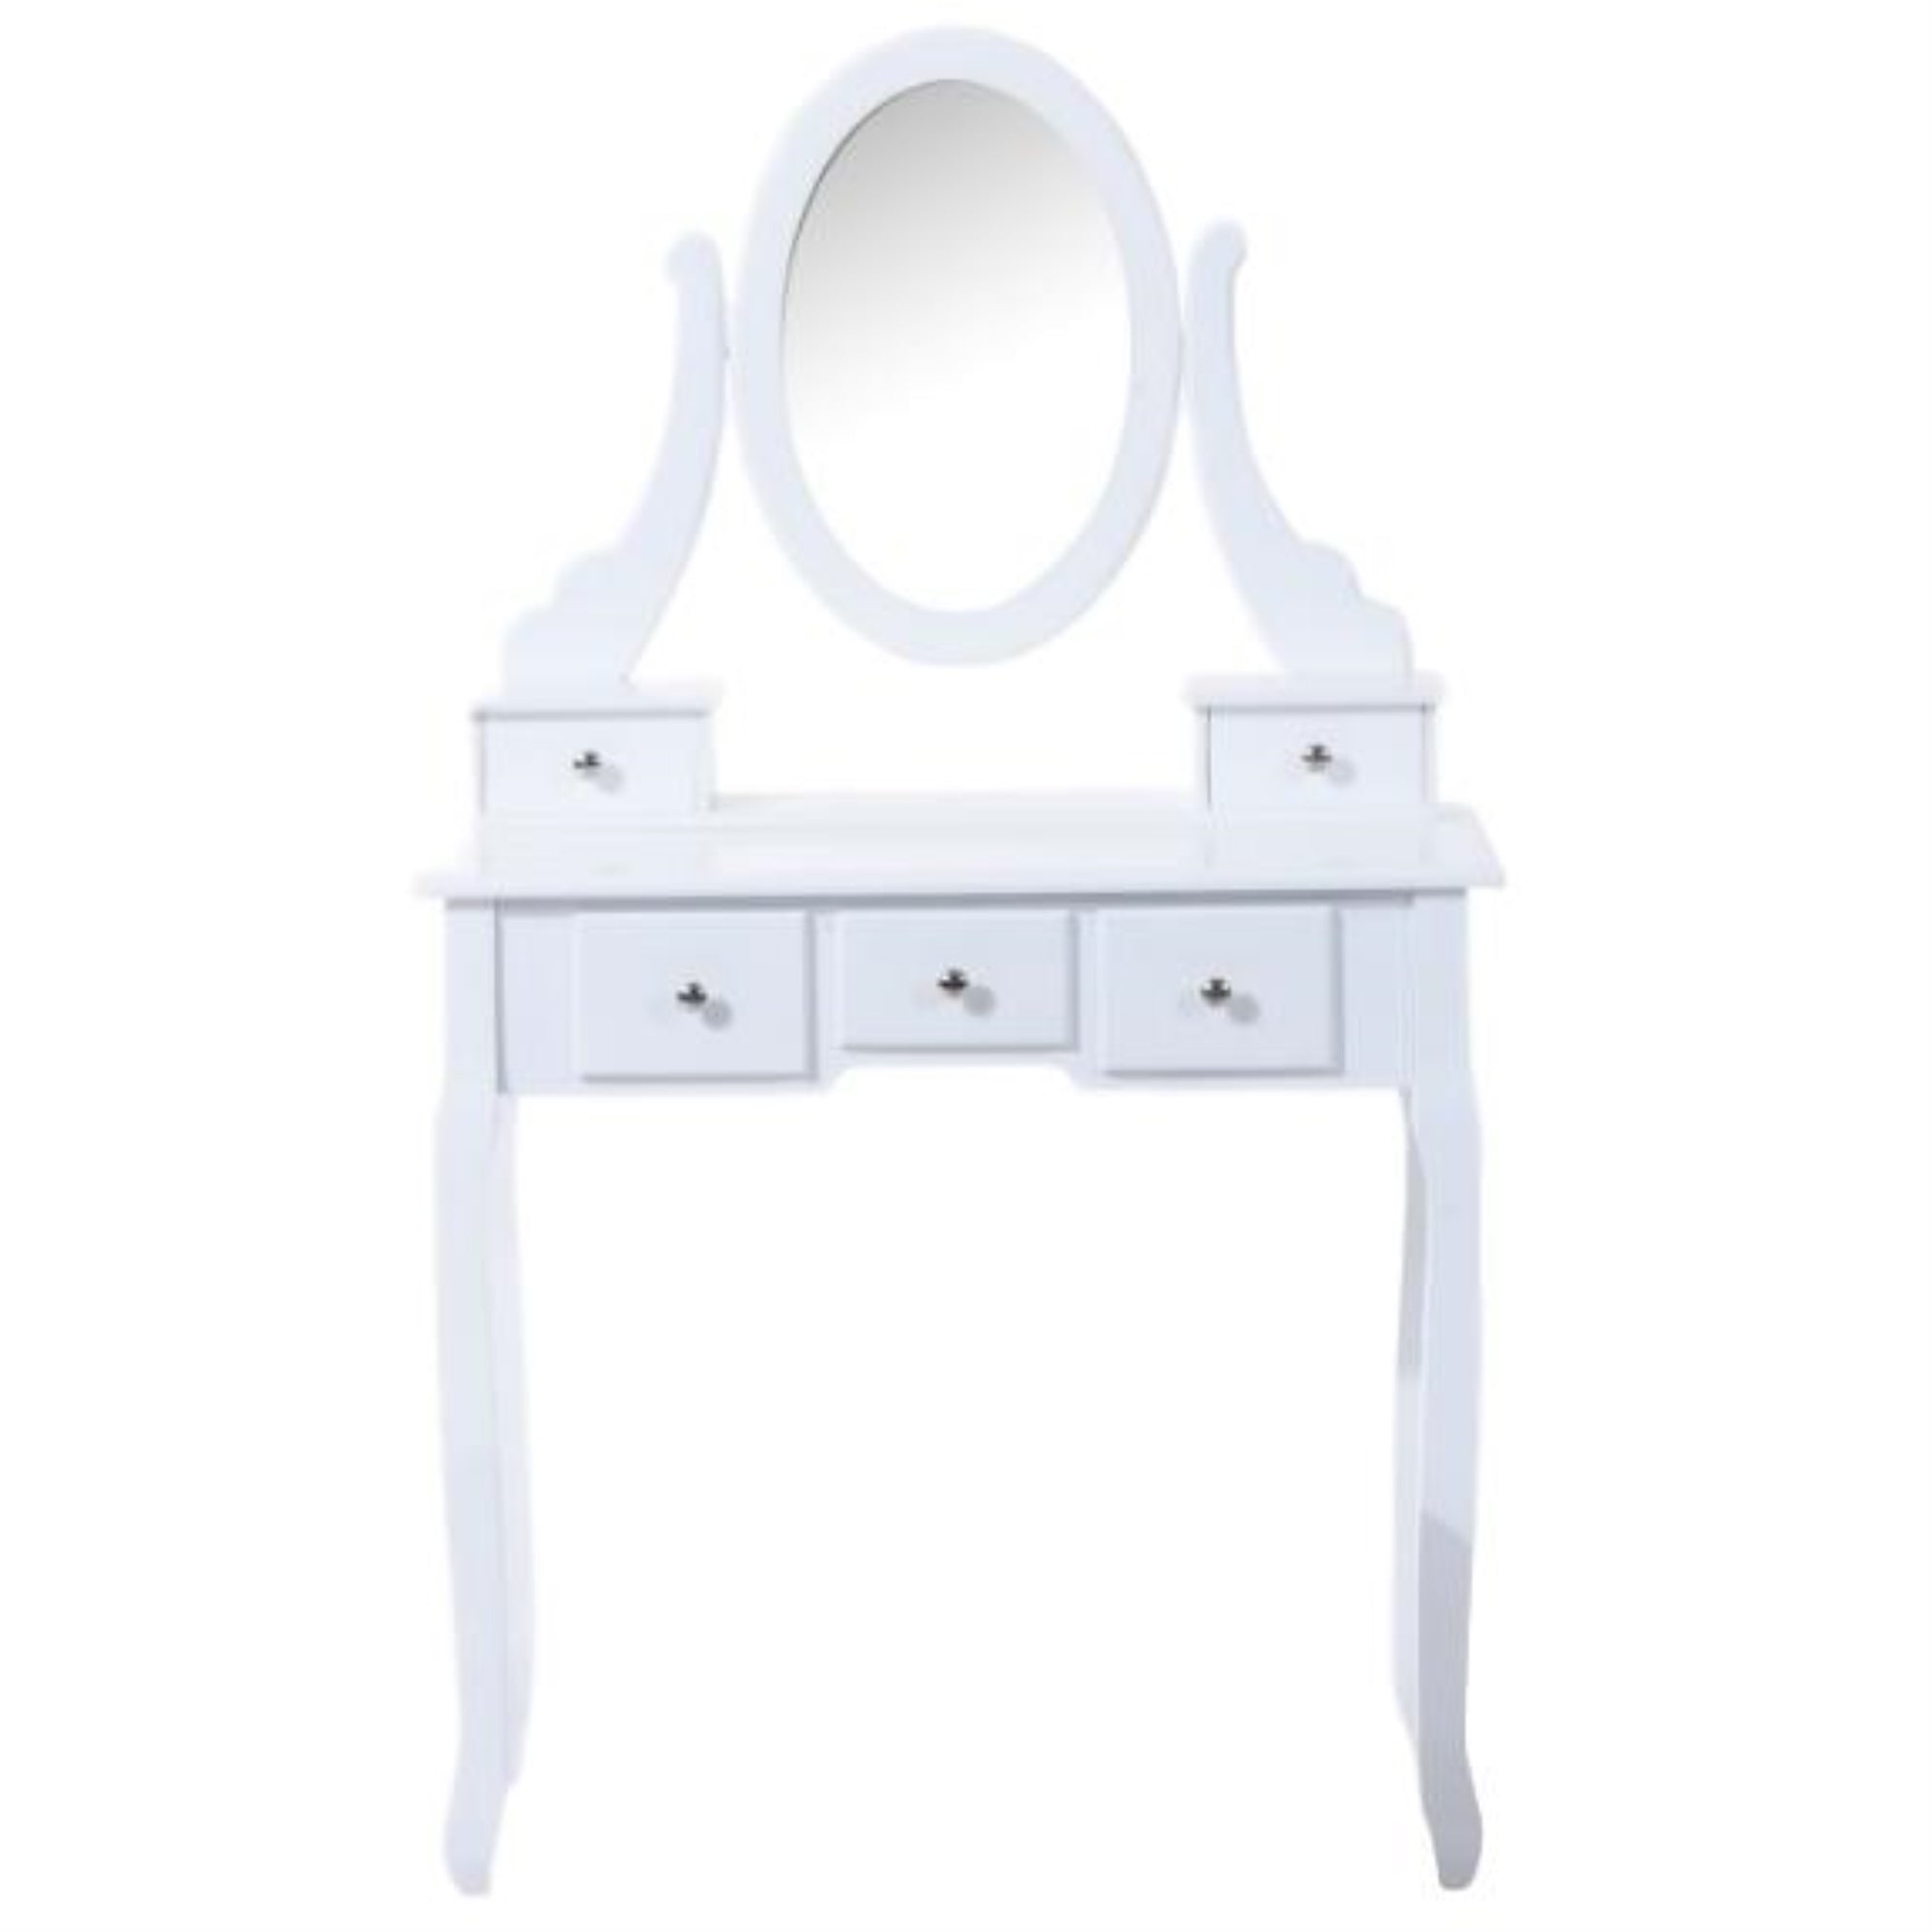 ViscoLogic Ivory Wooden Mirrored Makeup Vanity Table (White)